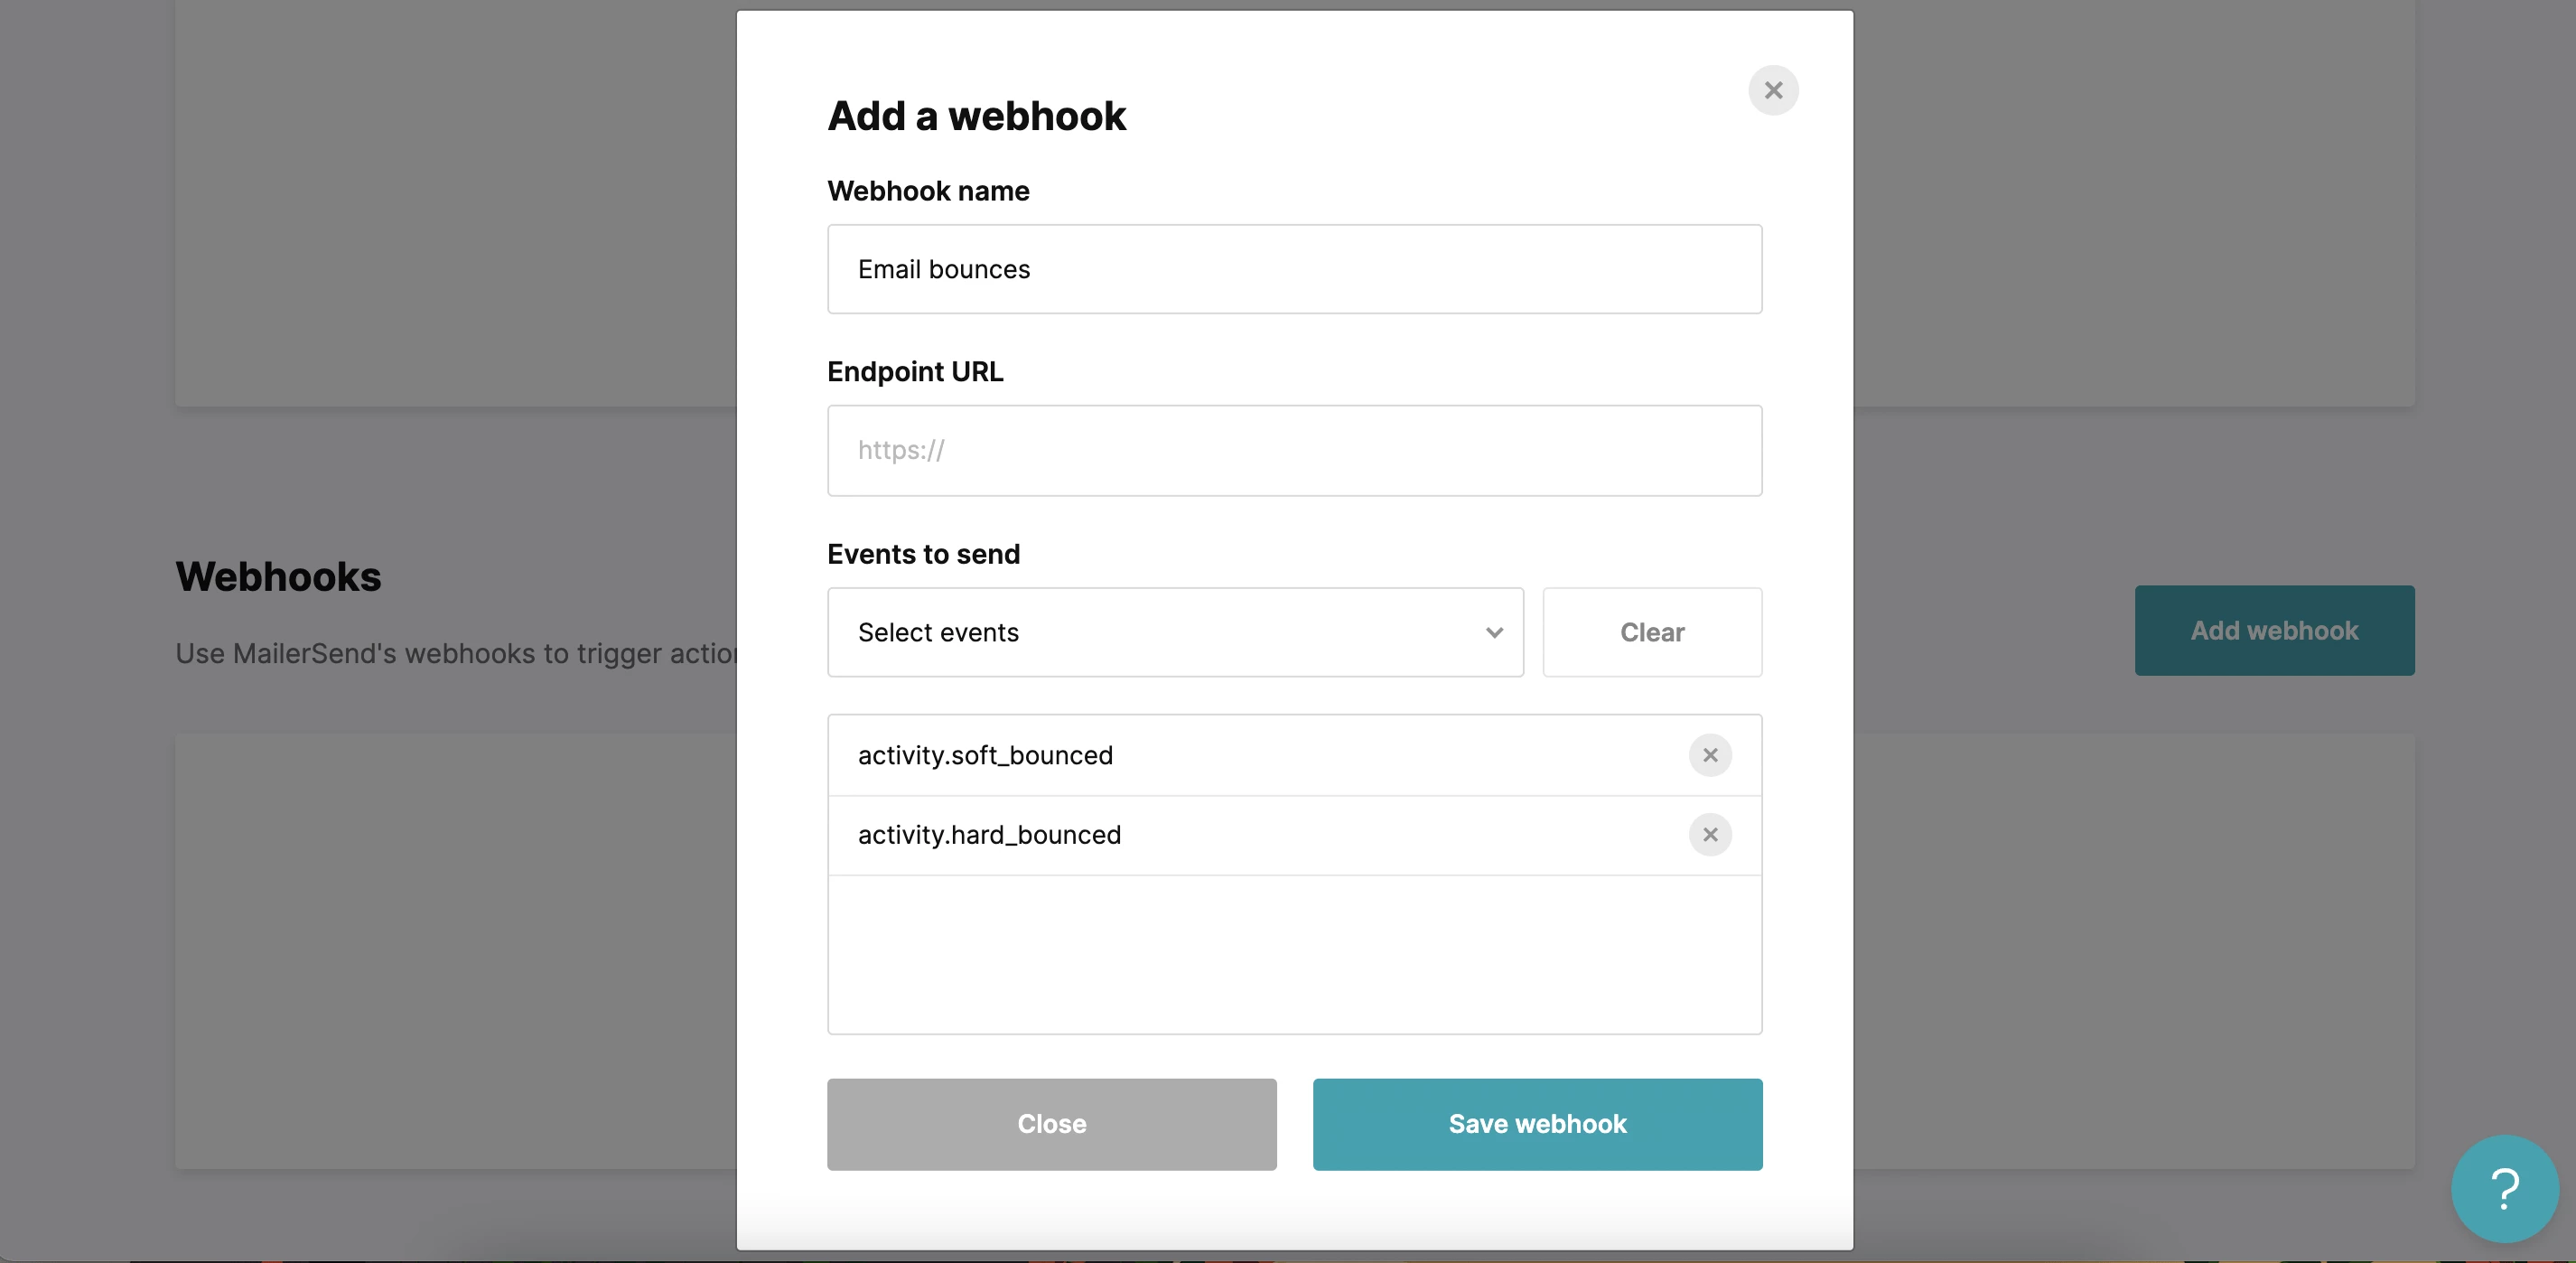 The MailerSend interface enabling users to add a webhook